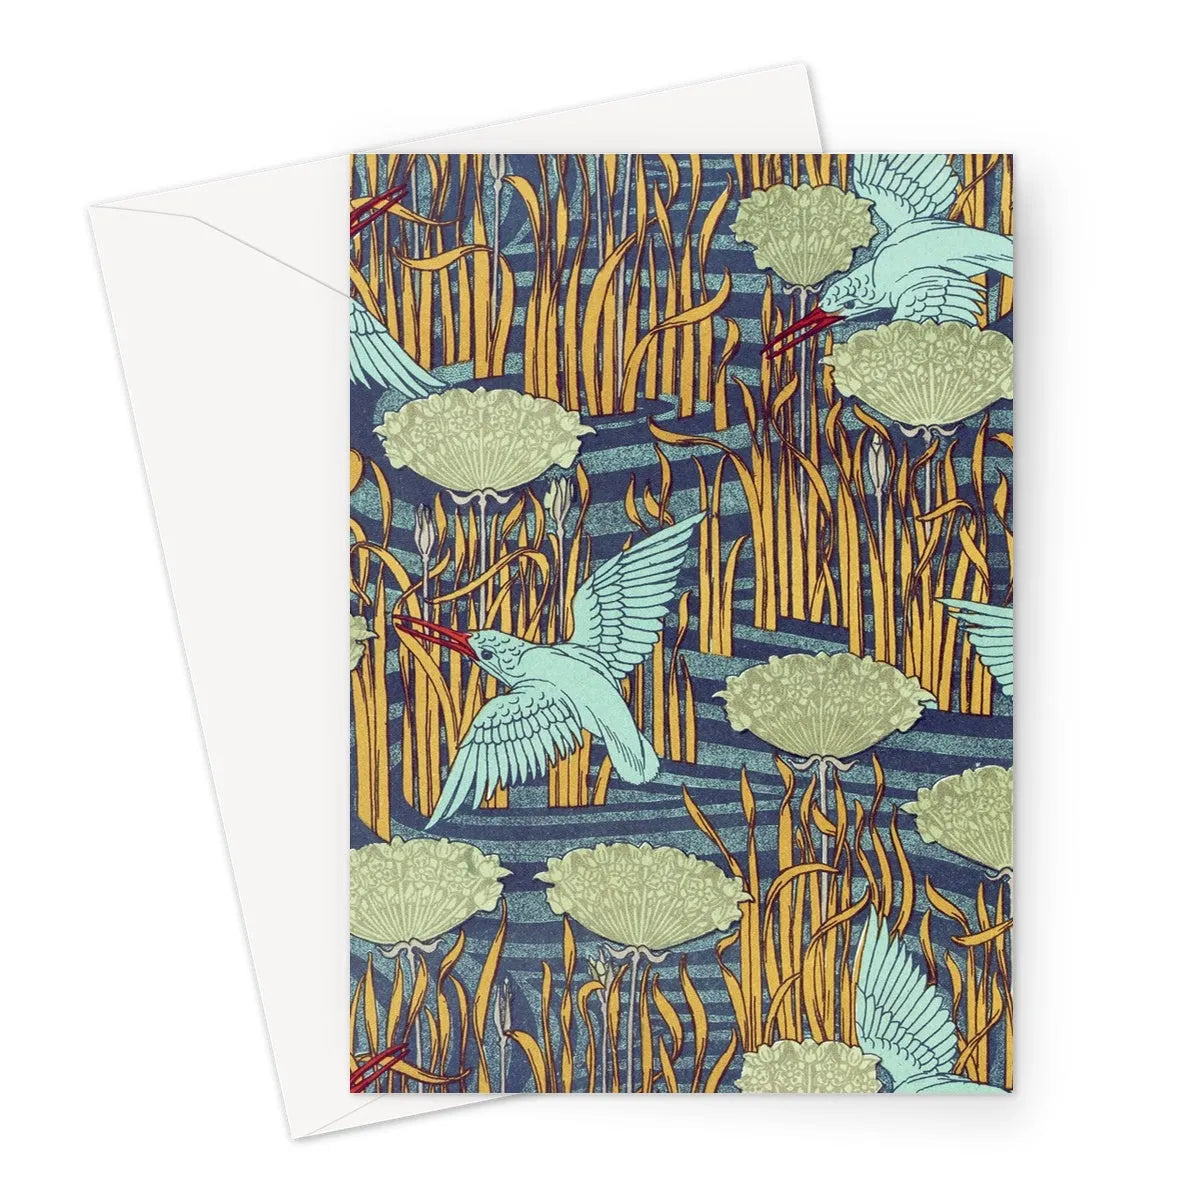 Martins-pêcheurs By Maurice Pillard Verneuil Greeting Card - A5 Portrait / 1 Card - Greeting & Note Cards - Aesthetic